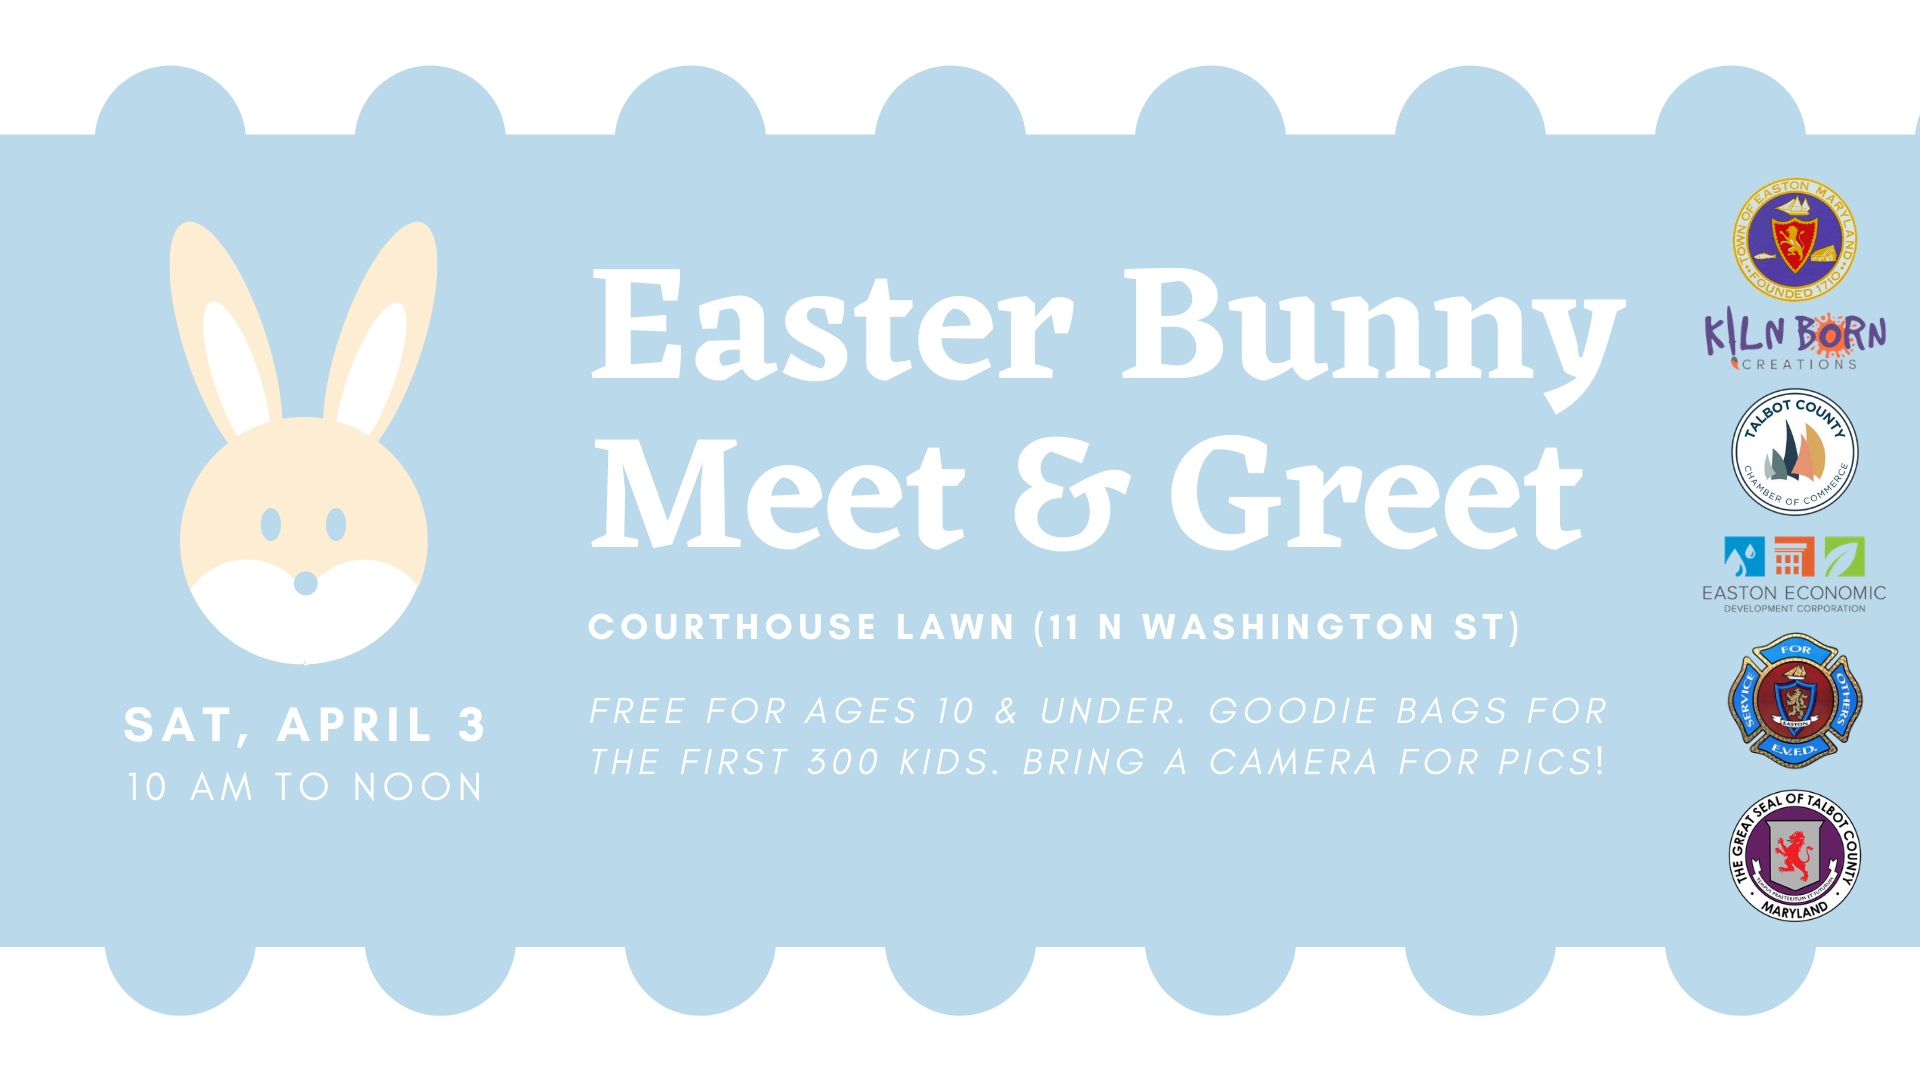 Easter Bunny Meet & Greet Event is a Community Effort